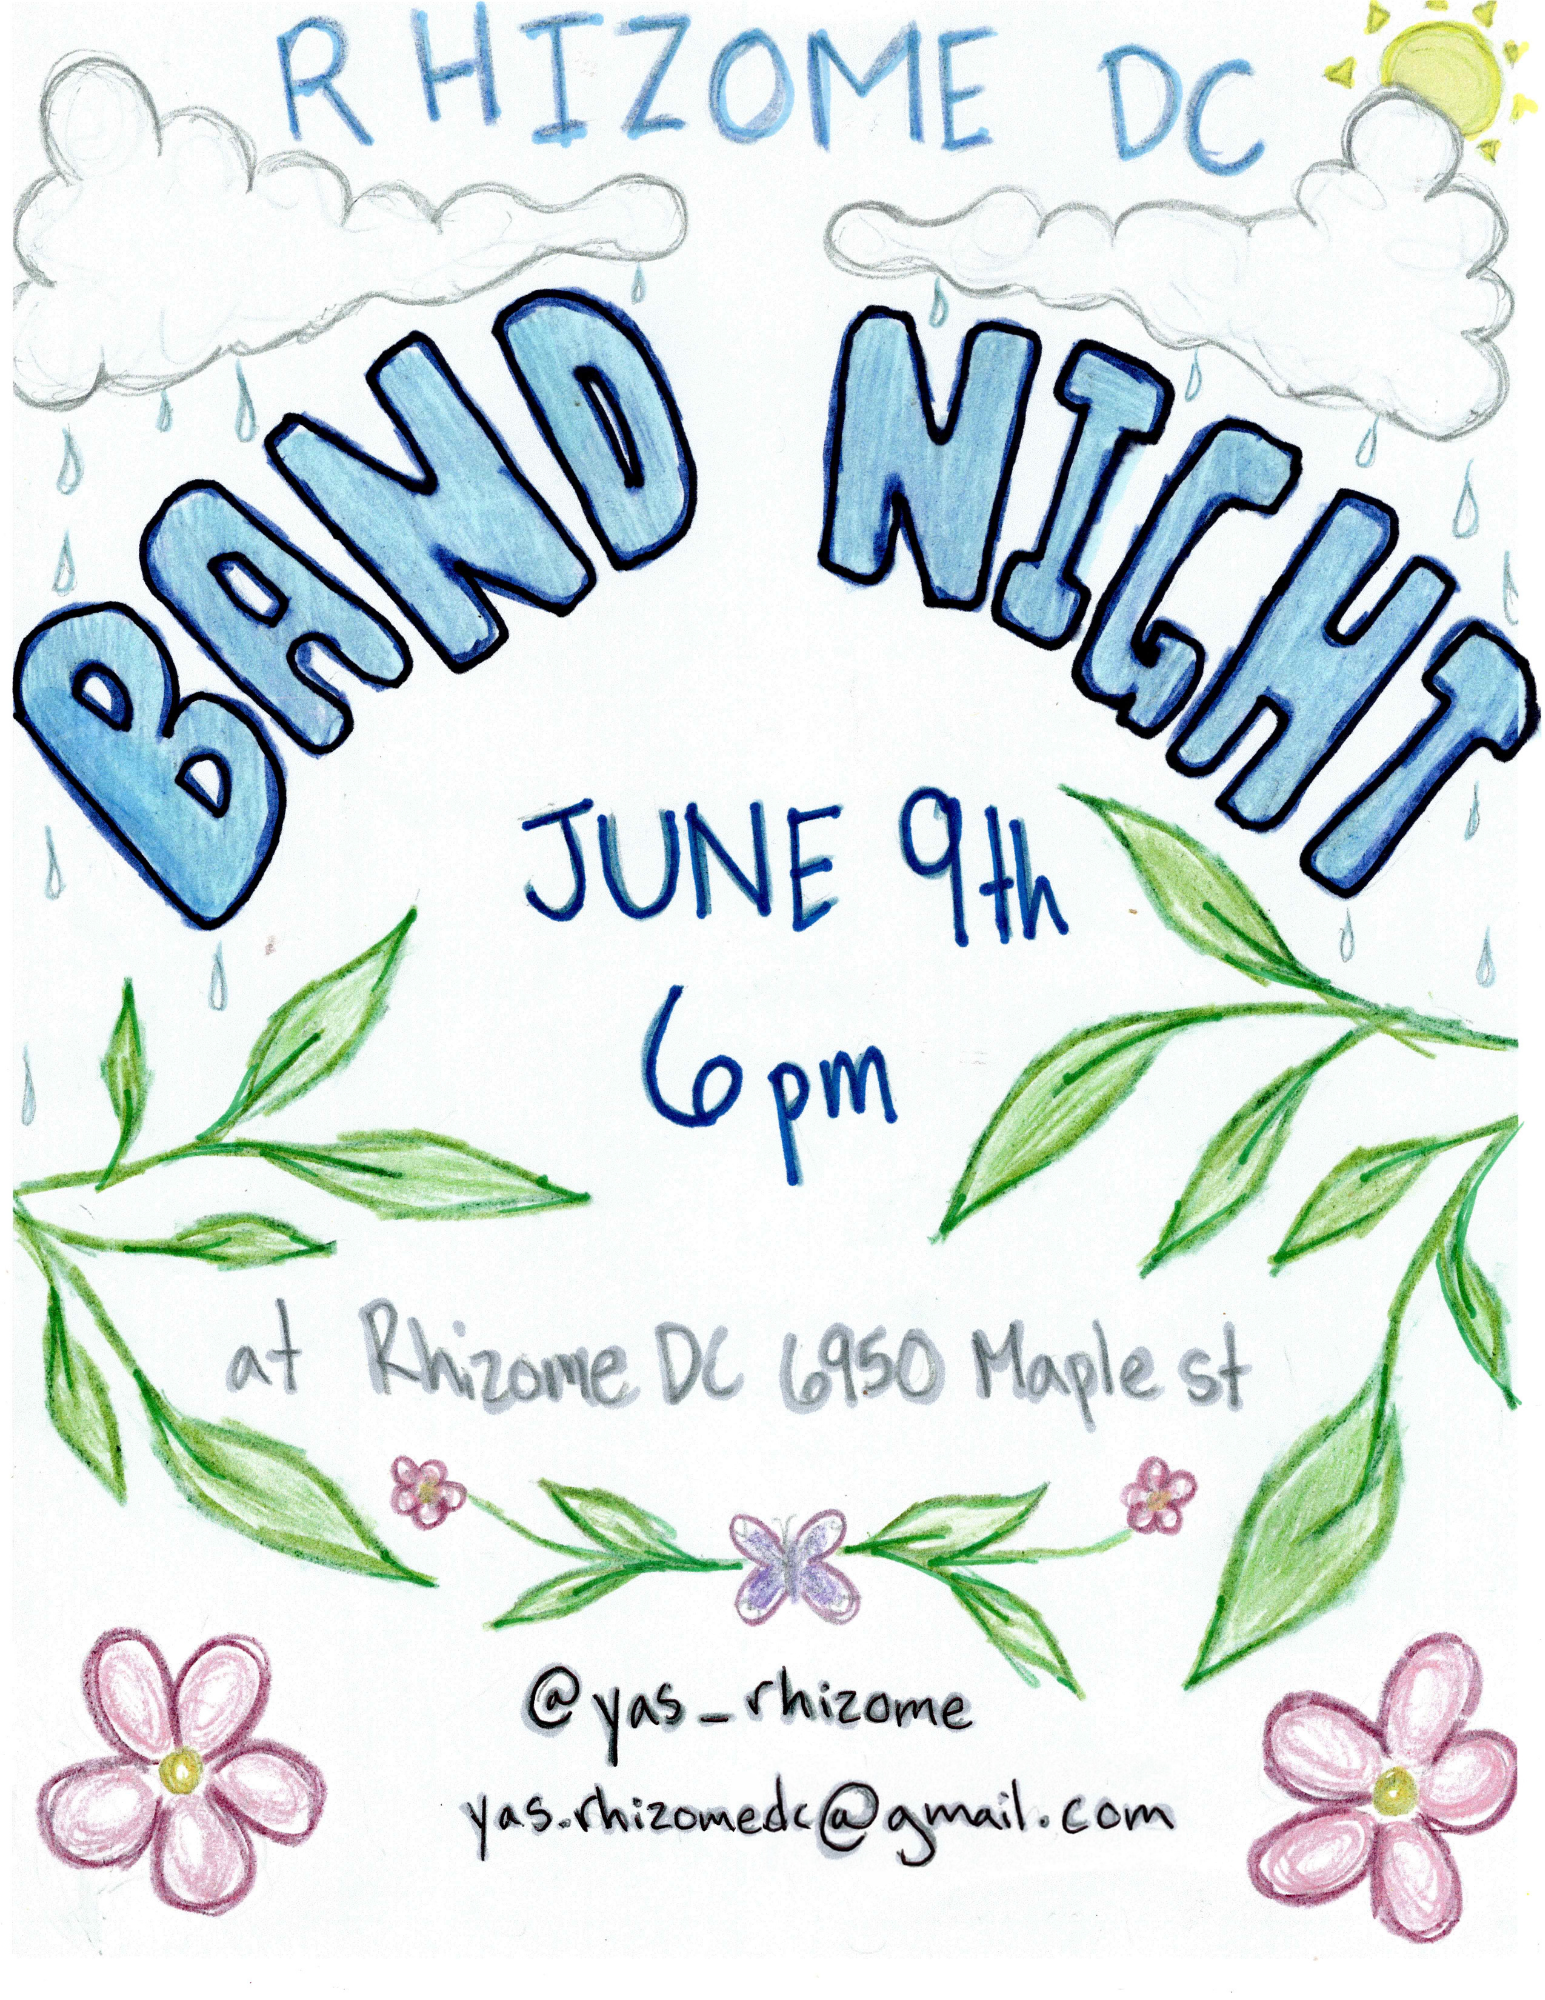 Youth Performance Series - Band Night